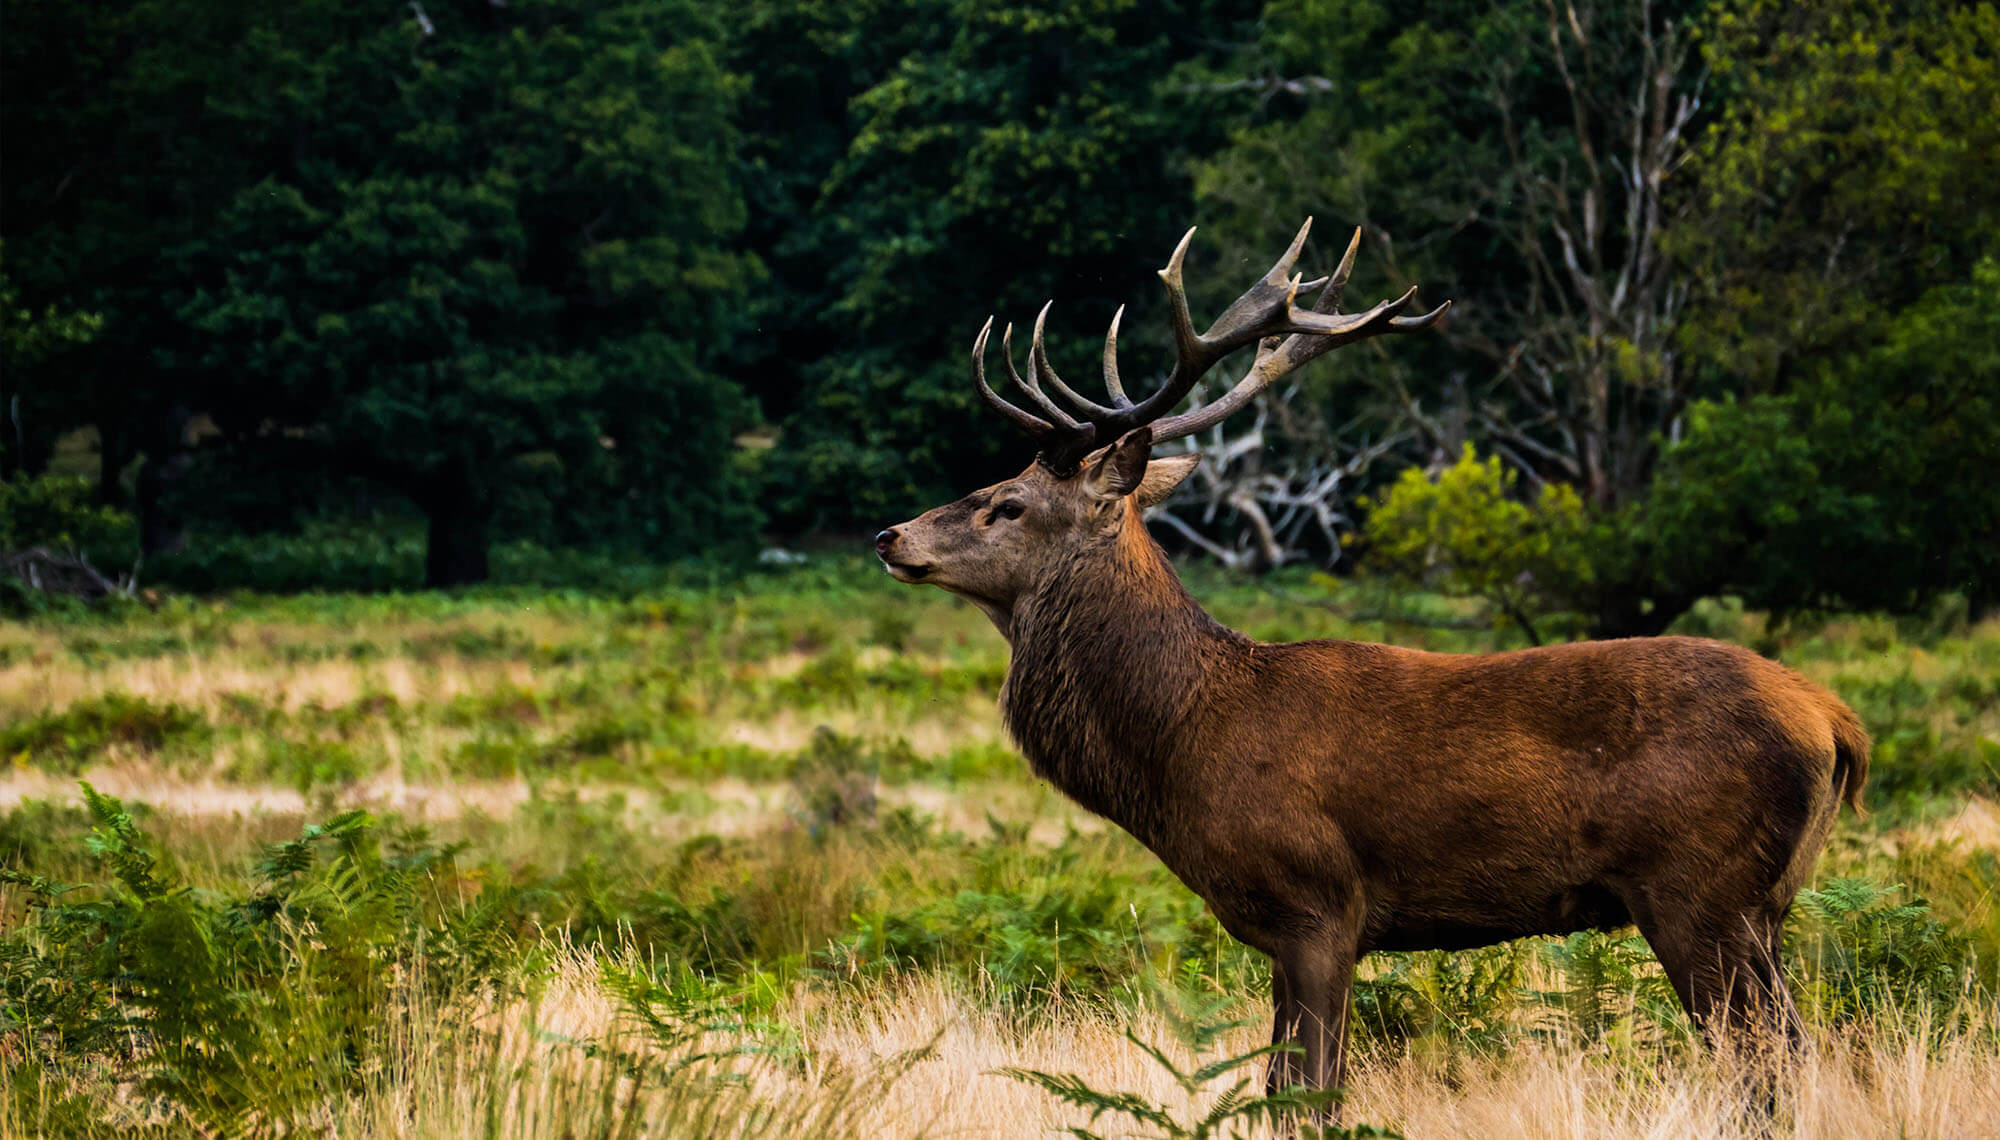 An image of a beautiful and elegant deer in woodland setting